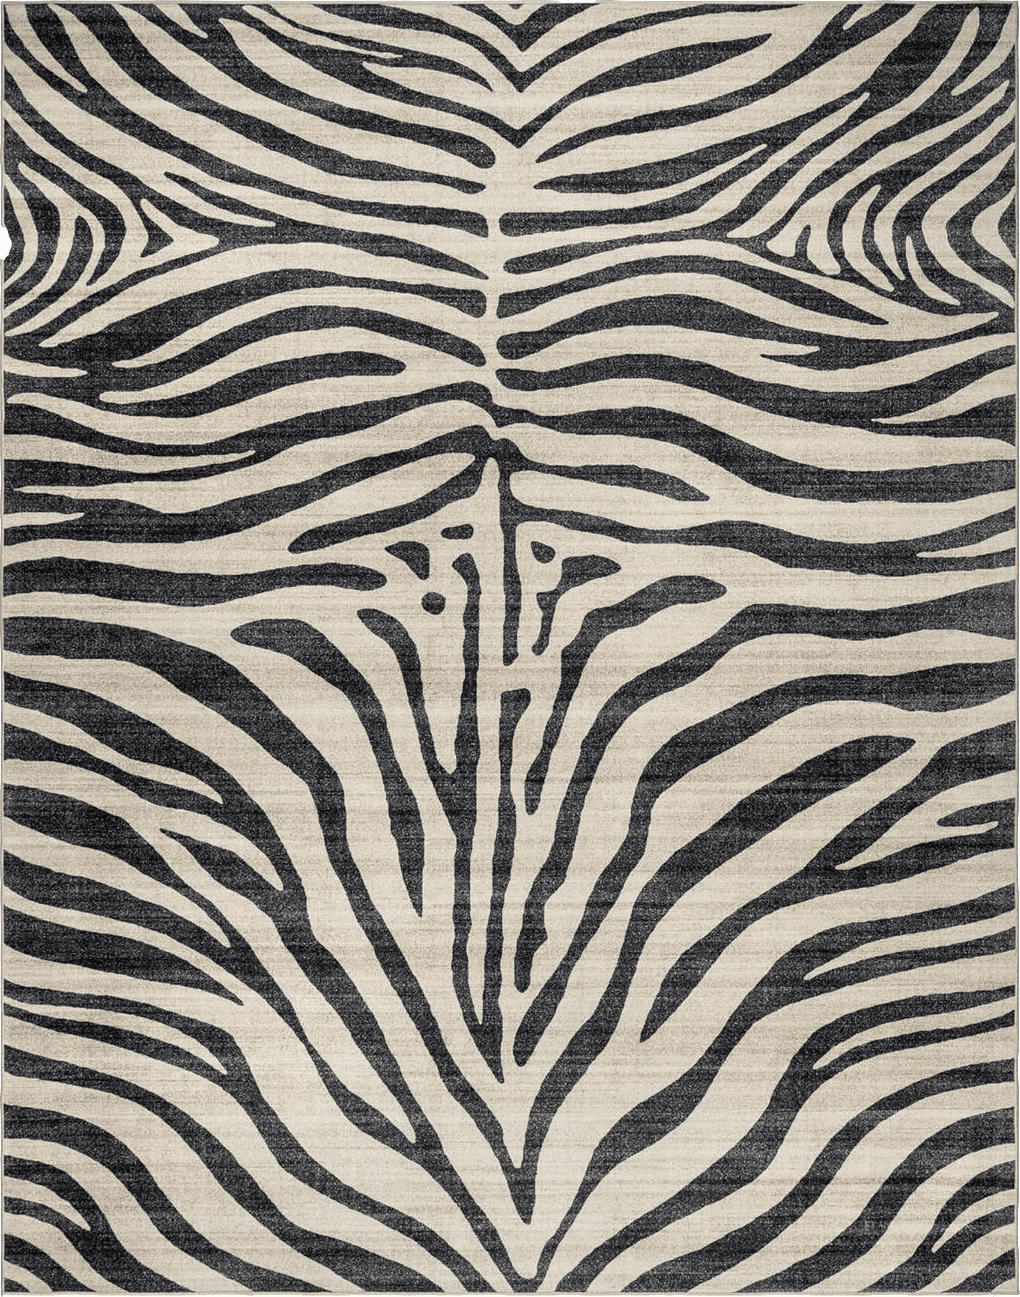 Snake rugs Gertmenian Boho Area Rug, 8x10 Large, Home Decor for Entryway, Bedroom, Living Room, Office, Kitchen, Non Slip, Soft, Low-Pile, Printed Indoor Accent Rugs, Animal, Zebra Black White, 28536